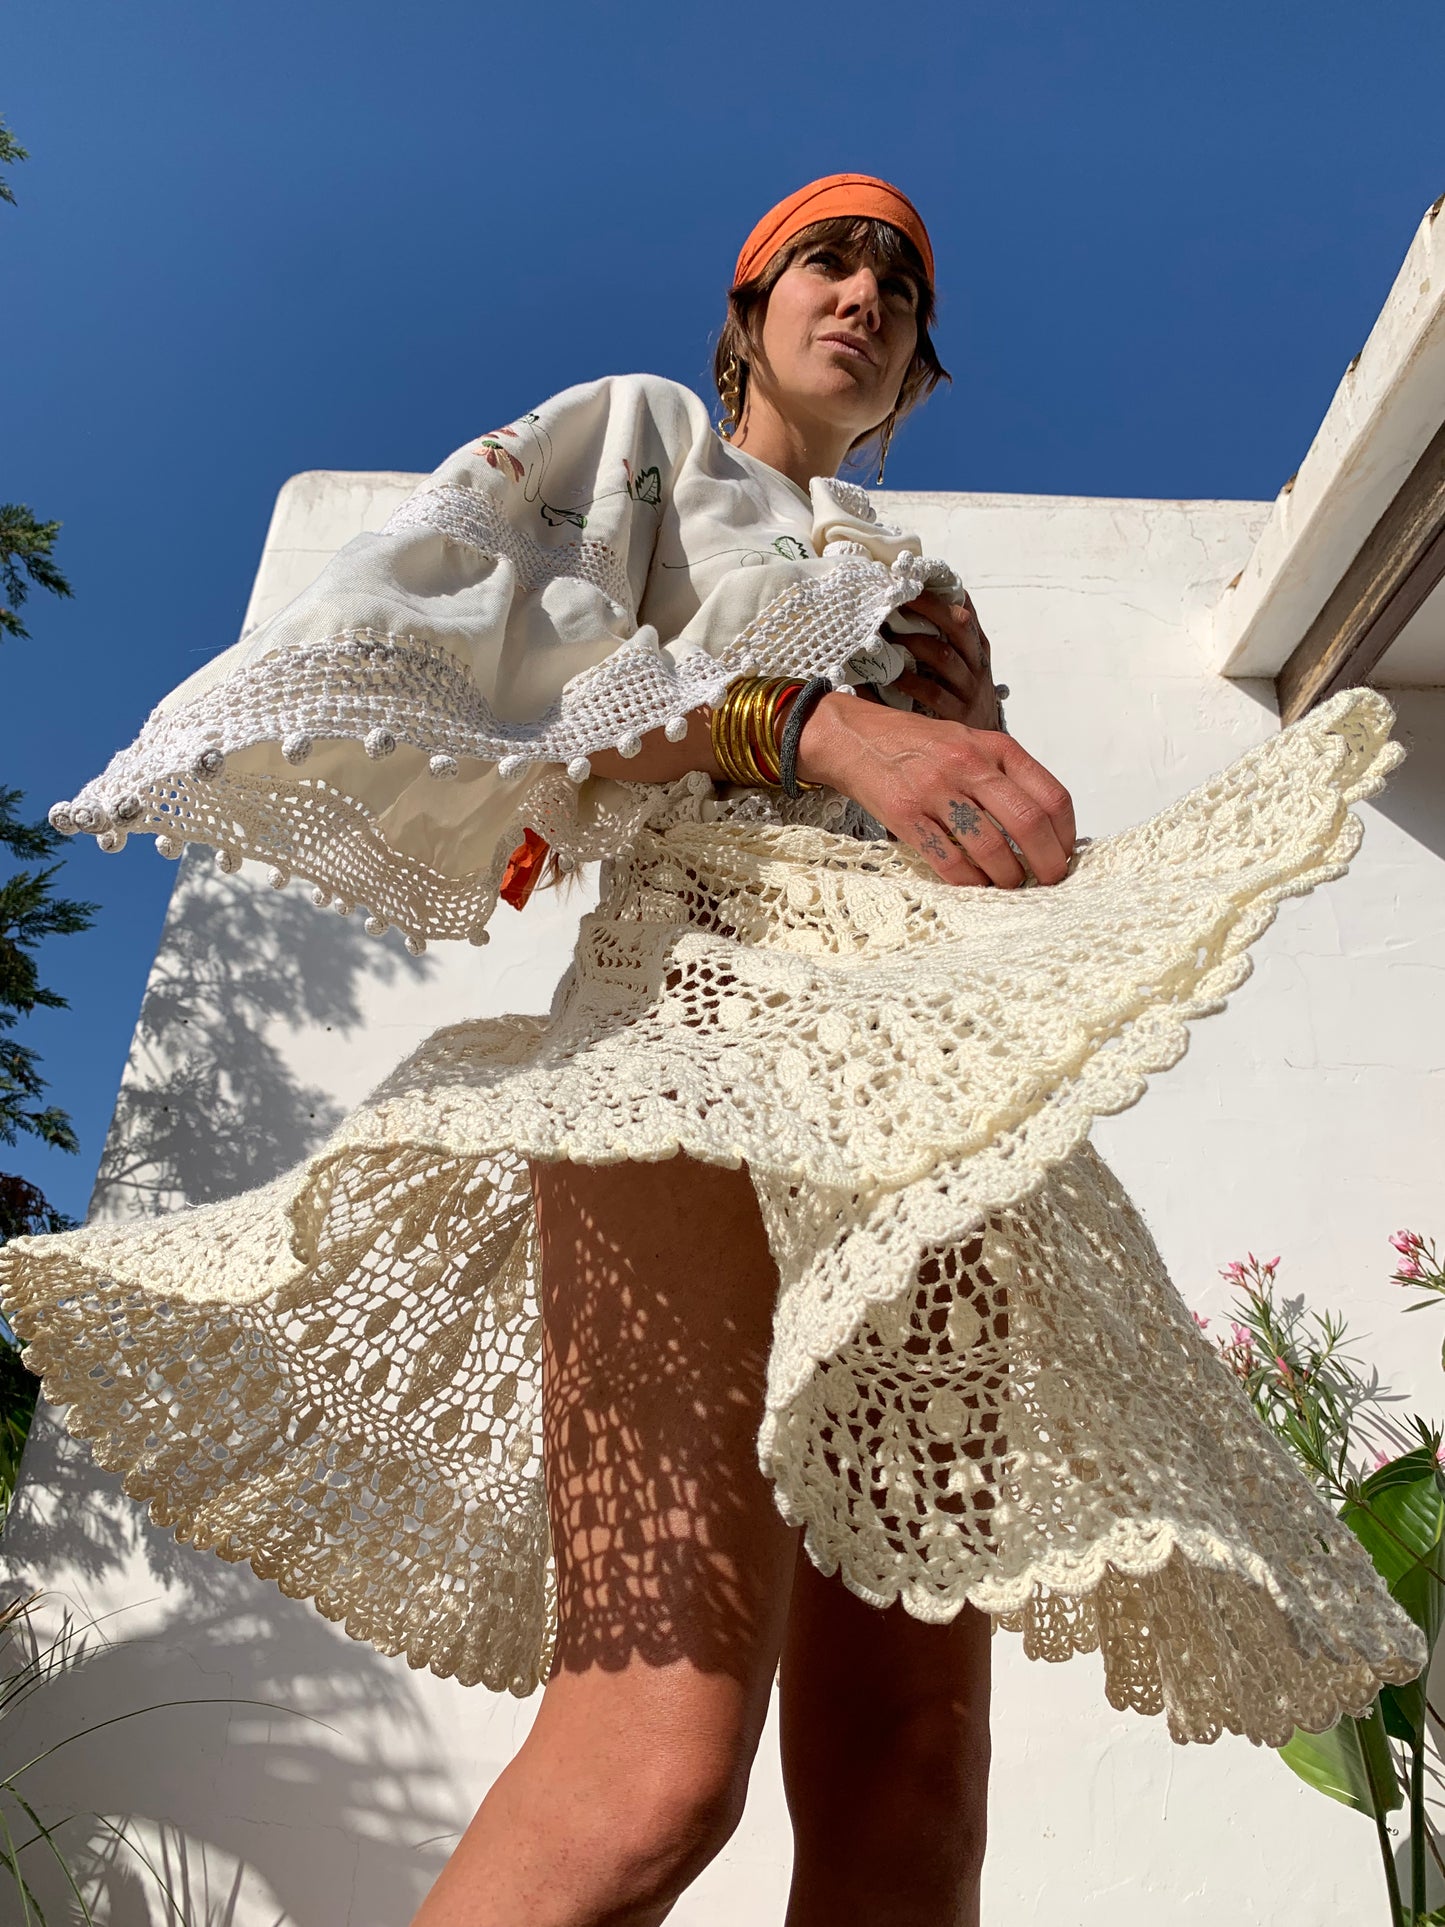 Antique Lace up-cycled skirt made in Ibiza by Vagabond Ibiza